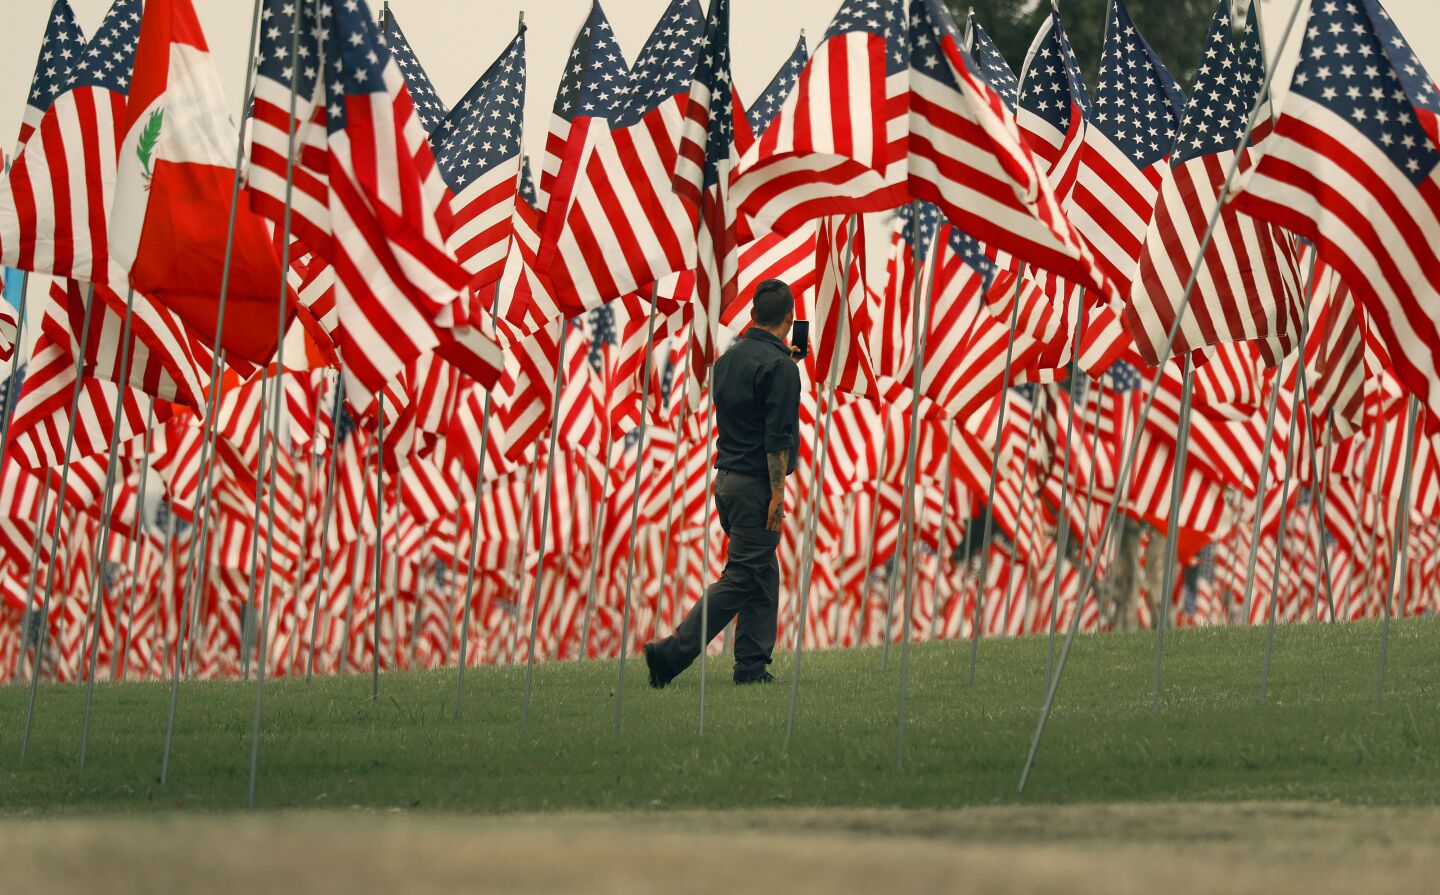 MALIBU, CA - SEPTEMBER 10: Rich Smith for his first time viewing the flags on Thursday as Pepperdine University for the 13th year is commemorating the lives lost in the terror attacks on September 11, 2001, with the Waves of Flags display at Alumni Park on the Malibu campus. In compliance with guidance provided by Los Angeles County due to the COVID-19 pandemic, the display will be closed to the public but spectators can view the display from the public sidewalk adjacent two the park. The installation commemorates the 2,977 lives lost in the terror attacks of September 11, 2001, featuring a vast display of American flags as well as international flags representing the home countries of those from abroad. Pepperdine University on Thursday, Sept. 10, 2020 in Malibu, CA. (Al Seib / Los Angeles Times